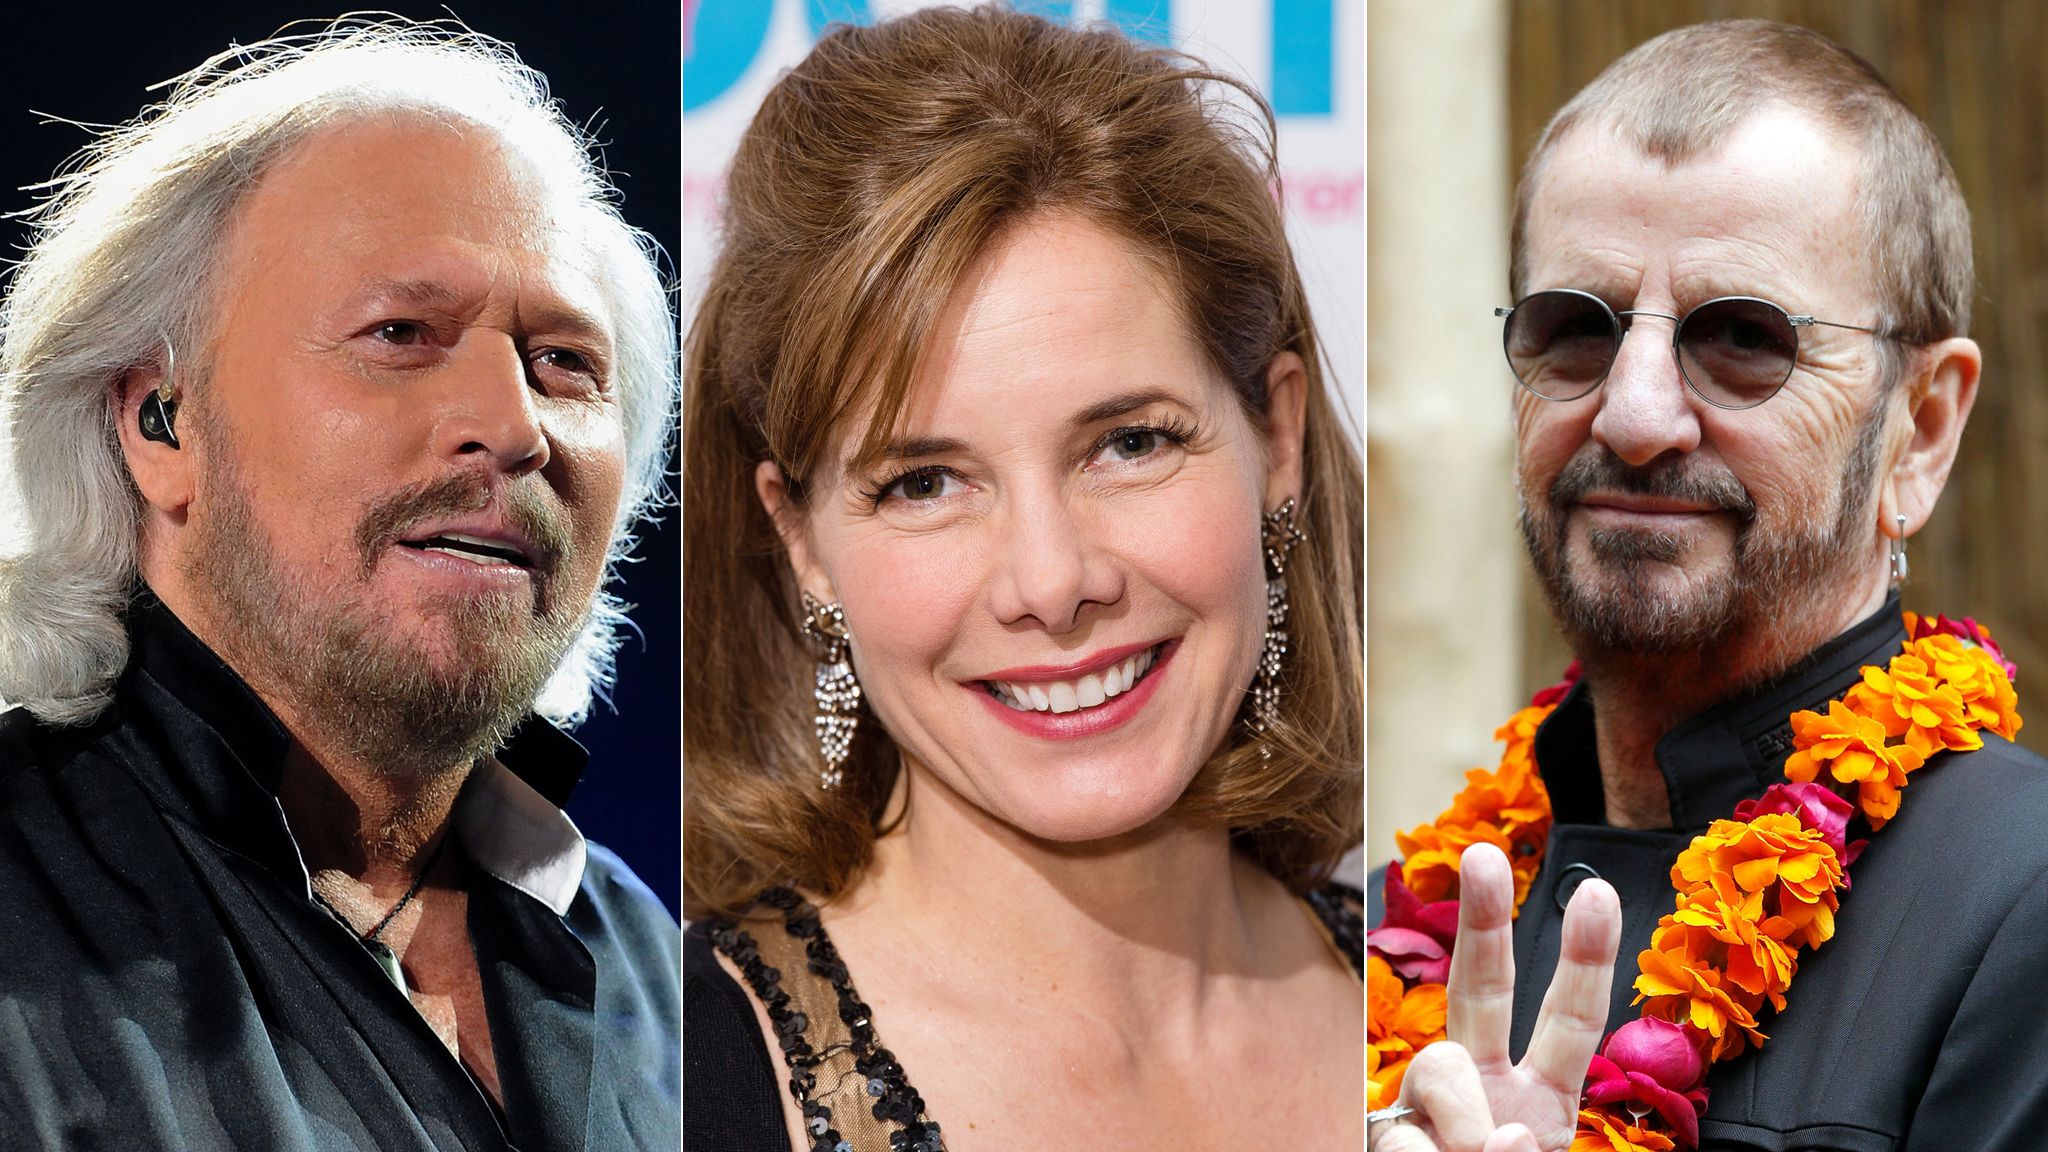 Barry Gibb, Darcey Bussell, Ringo Starr